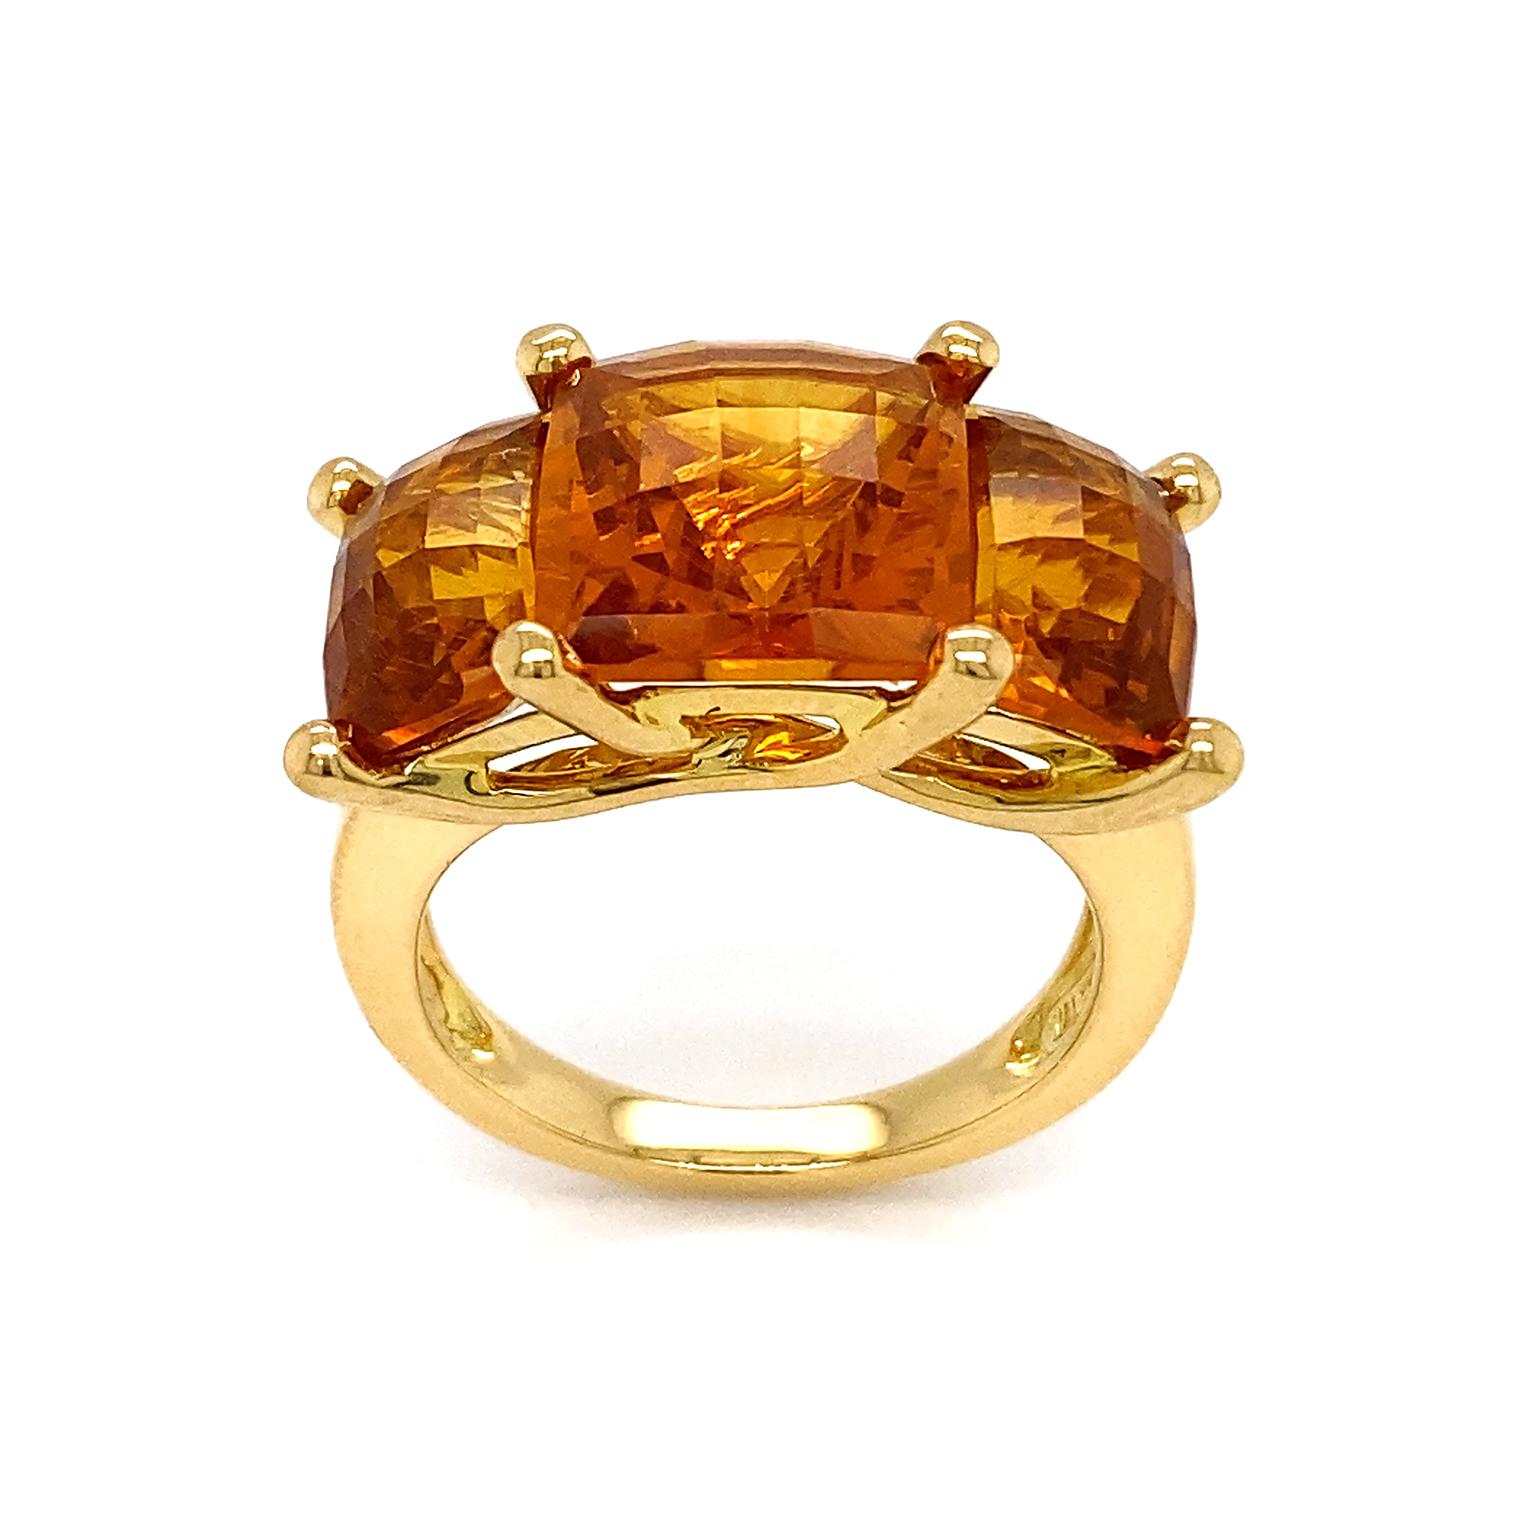 The flaming amber light of madeira citrine is the crown of this ring. Three cushion cuts of the gemstone are arranged with the center elevated above the other two. 18k yellow gold serves as the band and secures each gem as the prongs intertwine in a